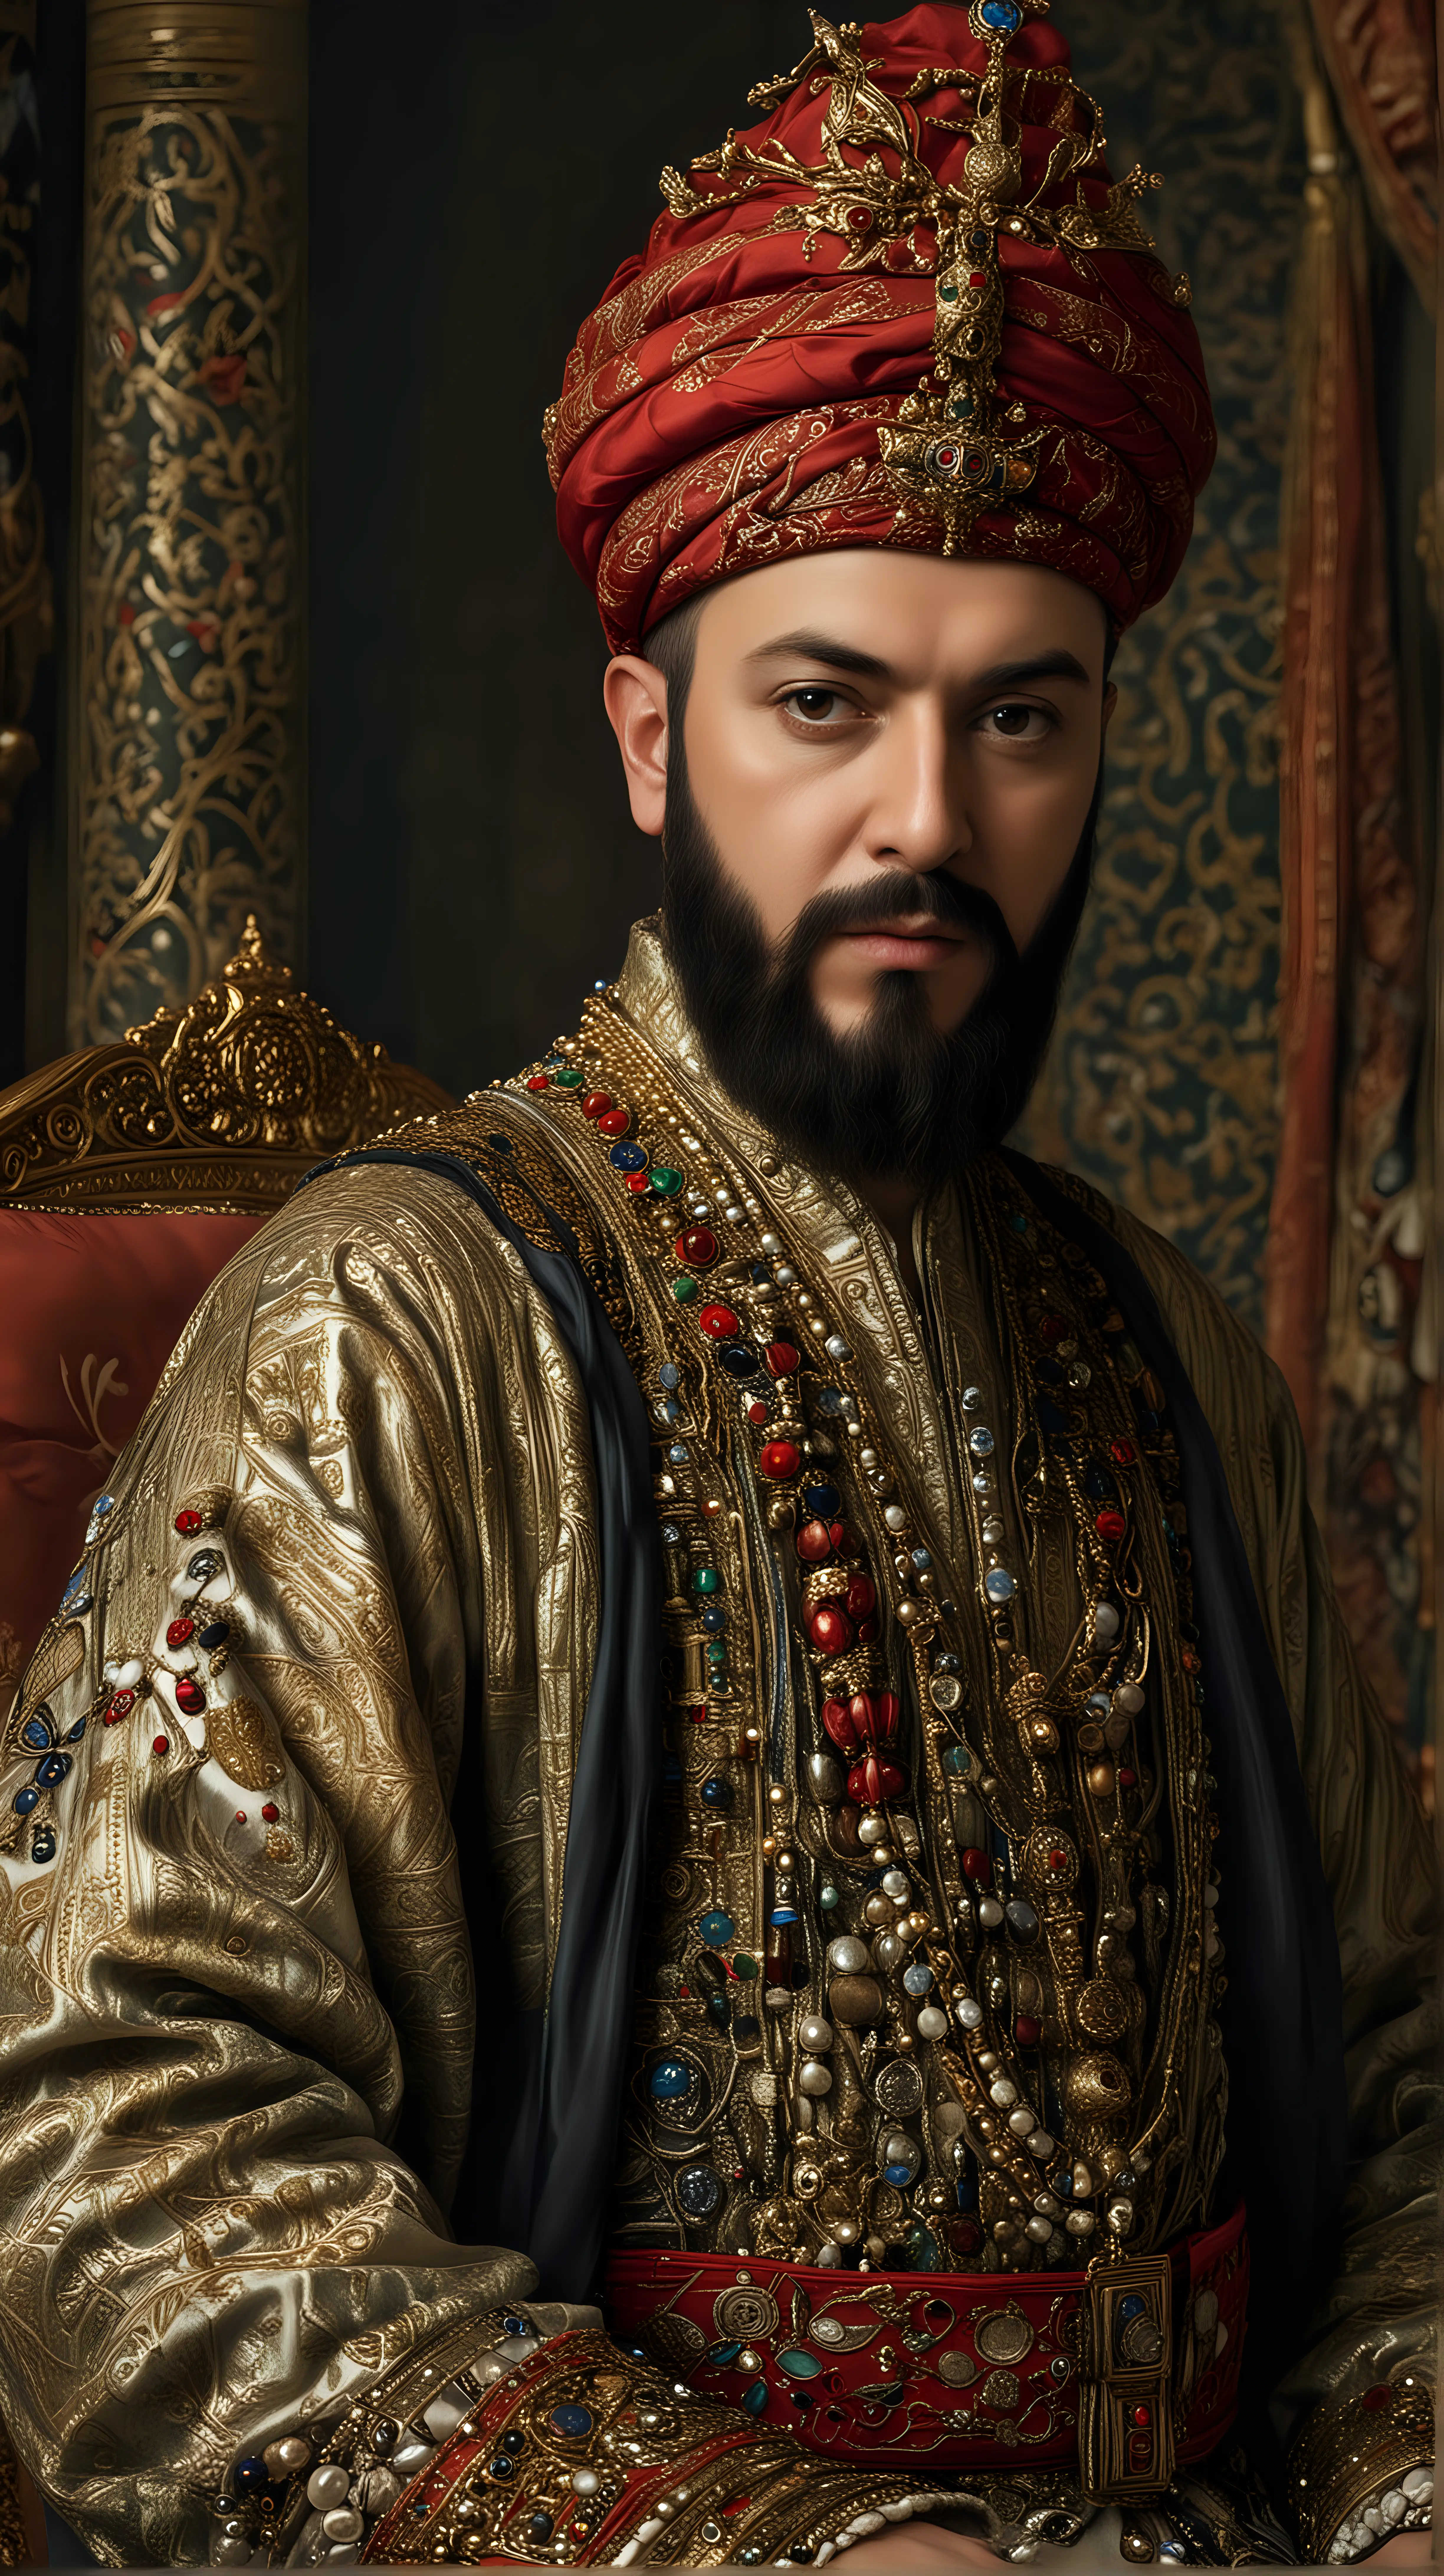  Legacy of Sultan Suleiman
Caption: Despite controversies surrounding his reign, Sultan Suleiman left a lasting legacy as a patron of the arts, law reformer, and military strategist. Hyper Realistic